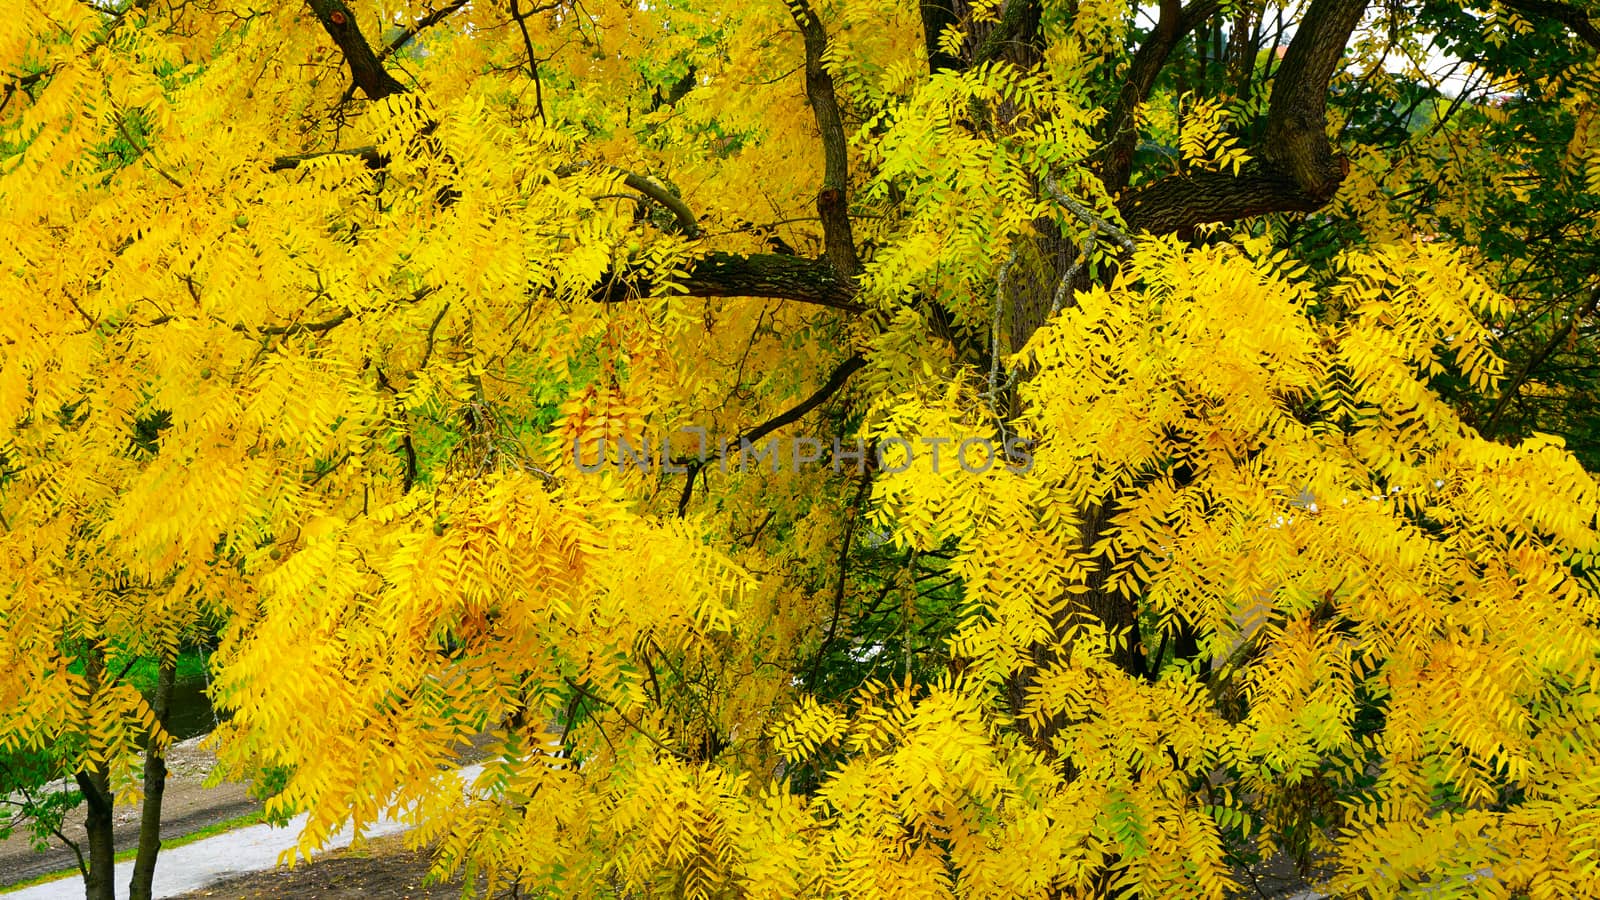 yellow leaves and tree in autumn season